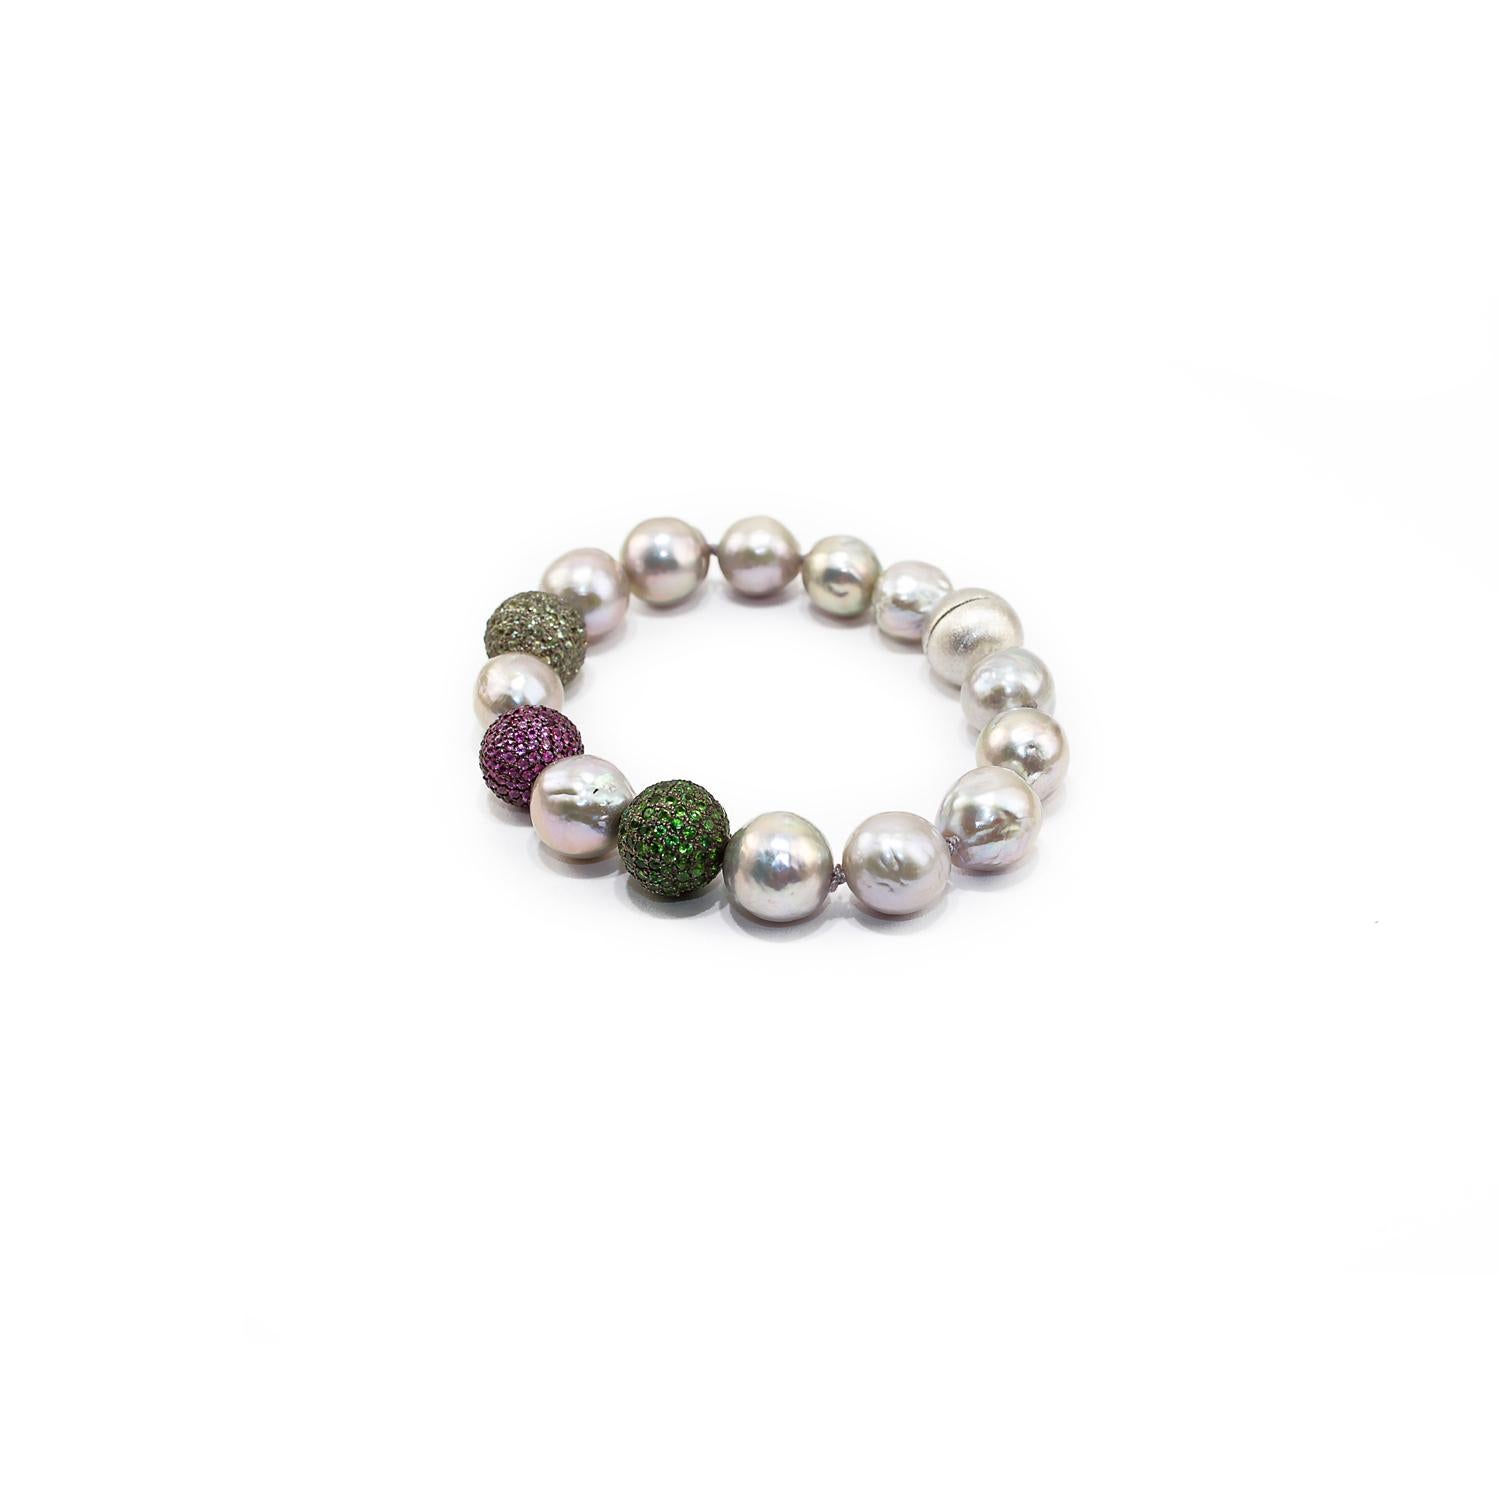 Uncut Green Sapphires, Rubies and Tsavorite Pave, Pearls and Silver Clasp For Sale